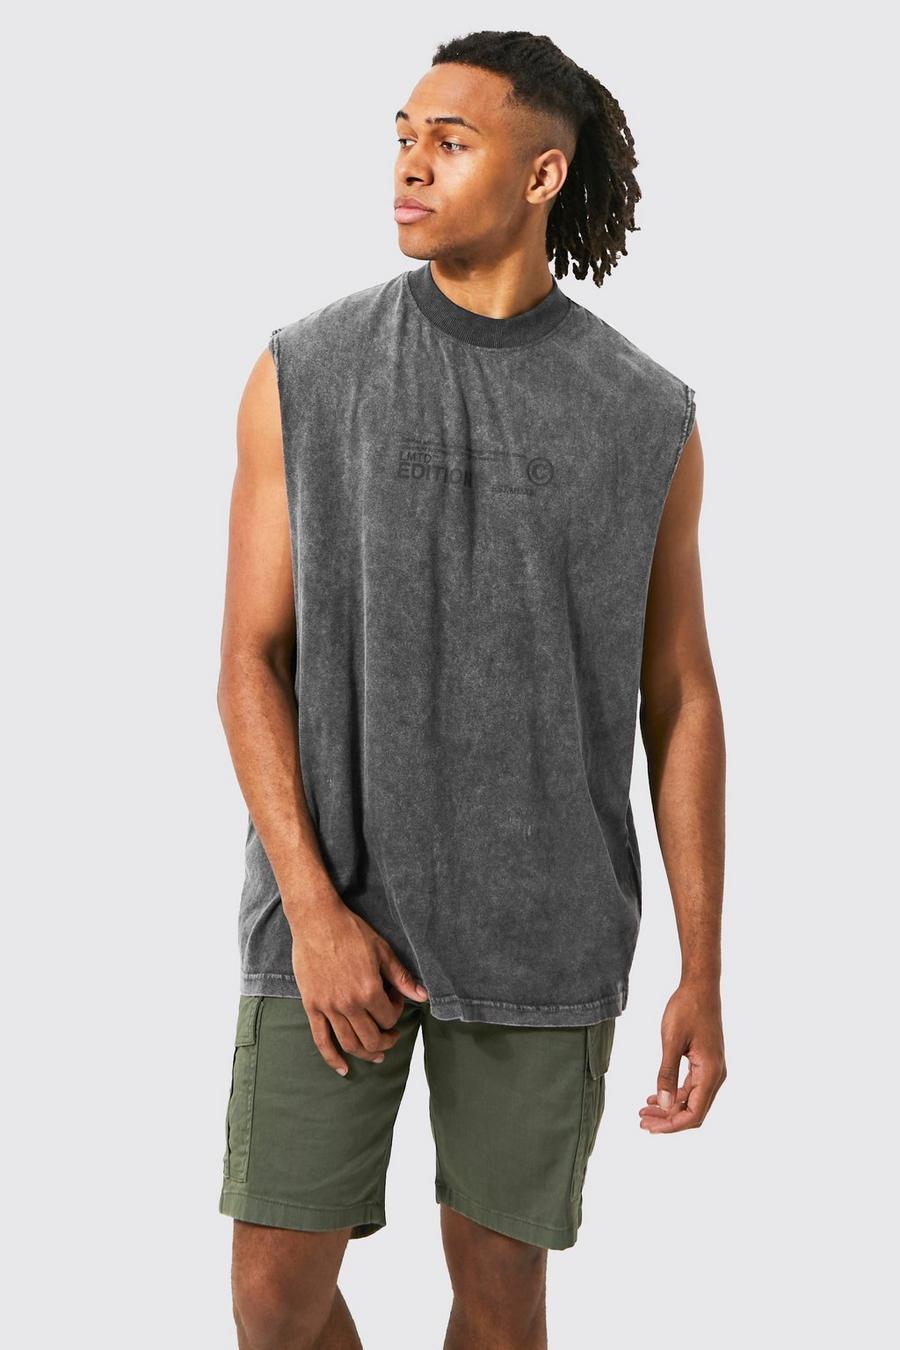 Charcoal grey Oversized Washed Extended Neck Tank